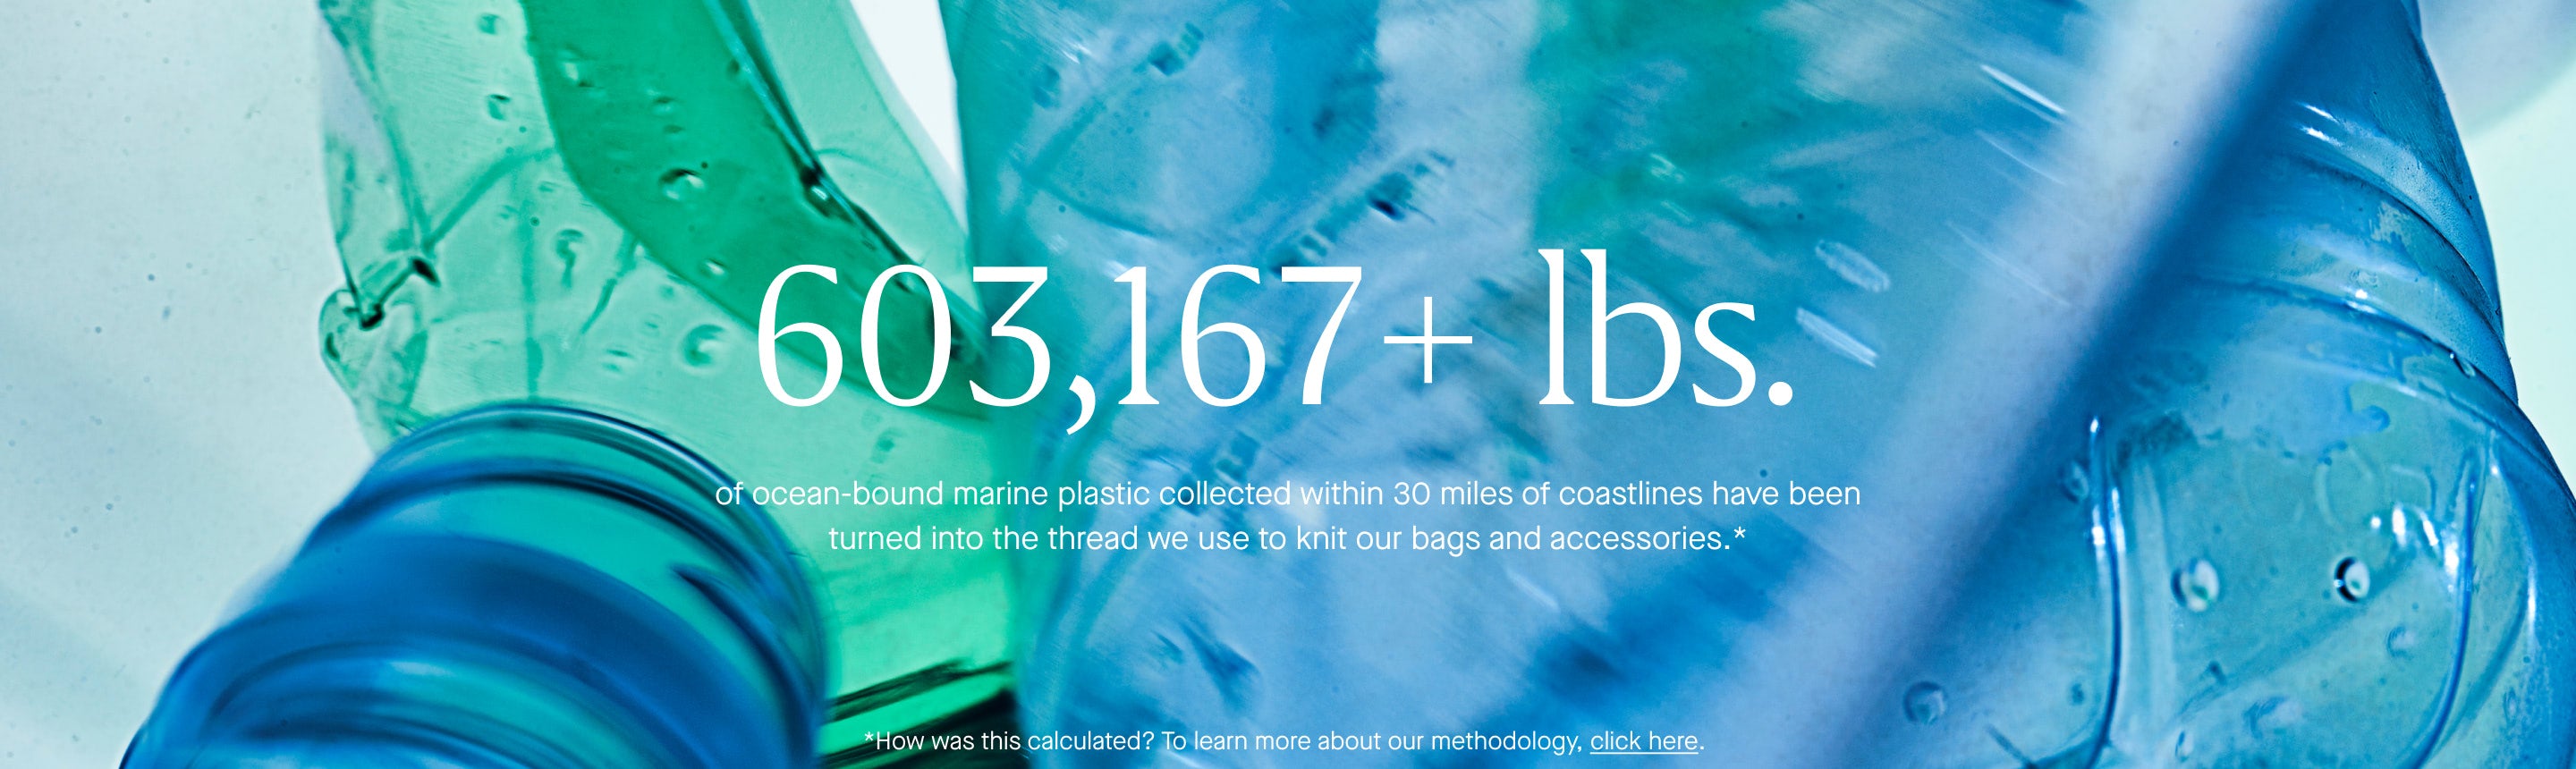 603,167+lbs of ocean-bound marine plastic collected within 30 miles of coastlines have been turned into the thread we use to knit our bags and accessories.*